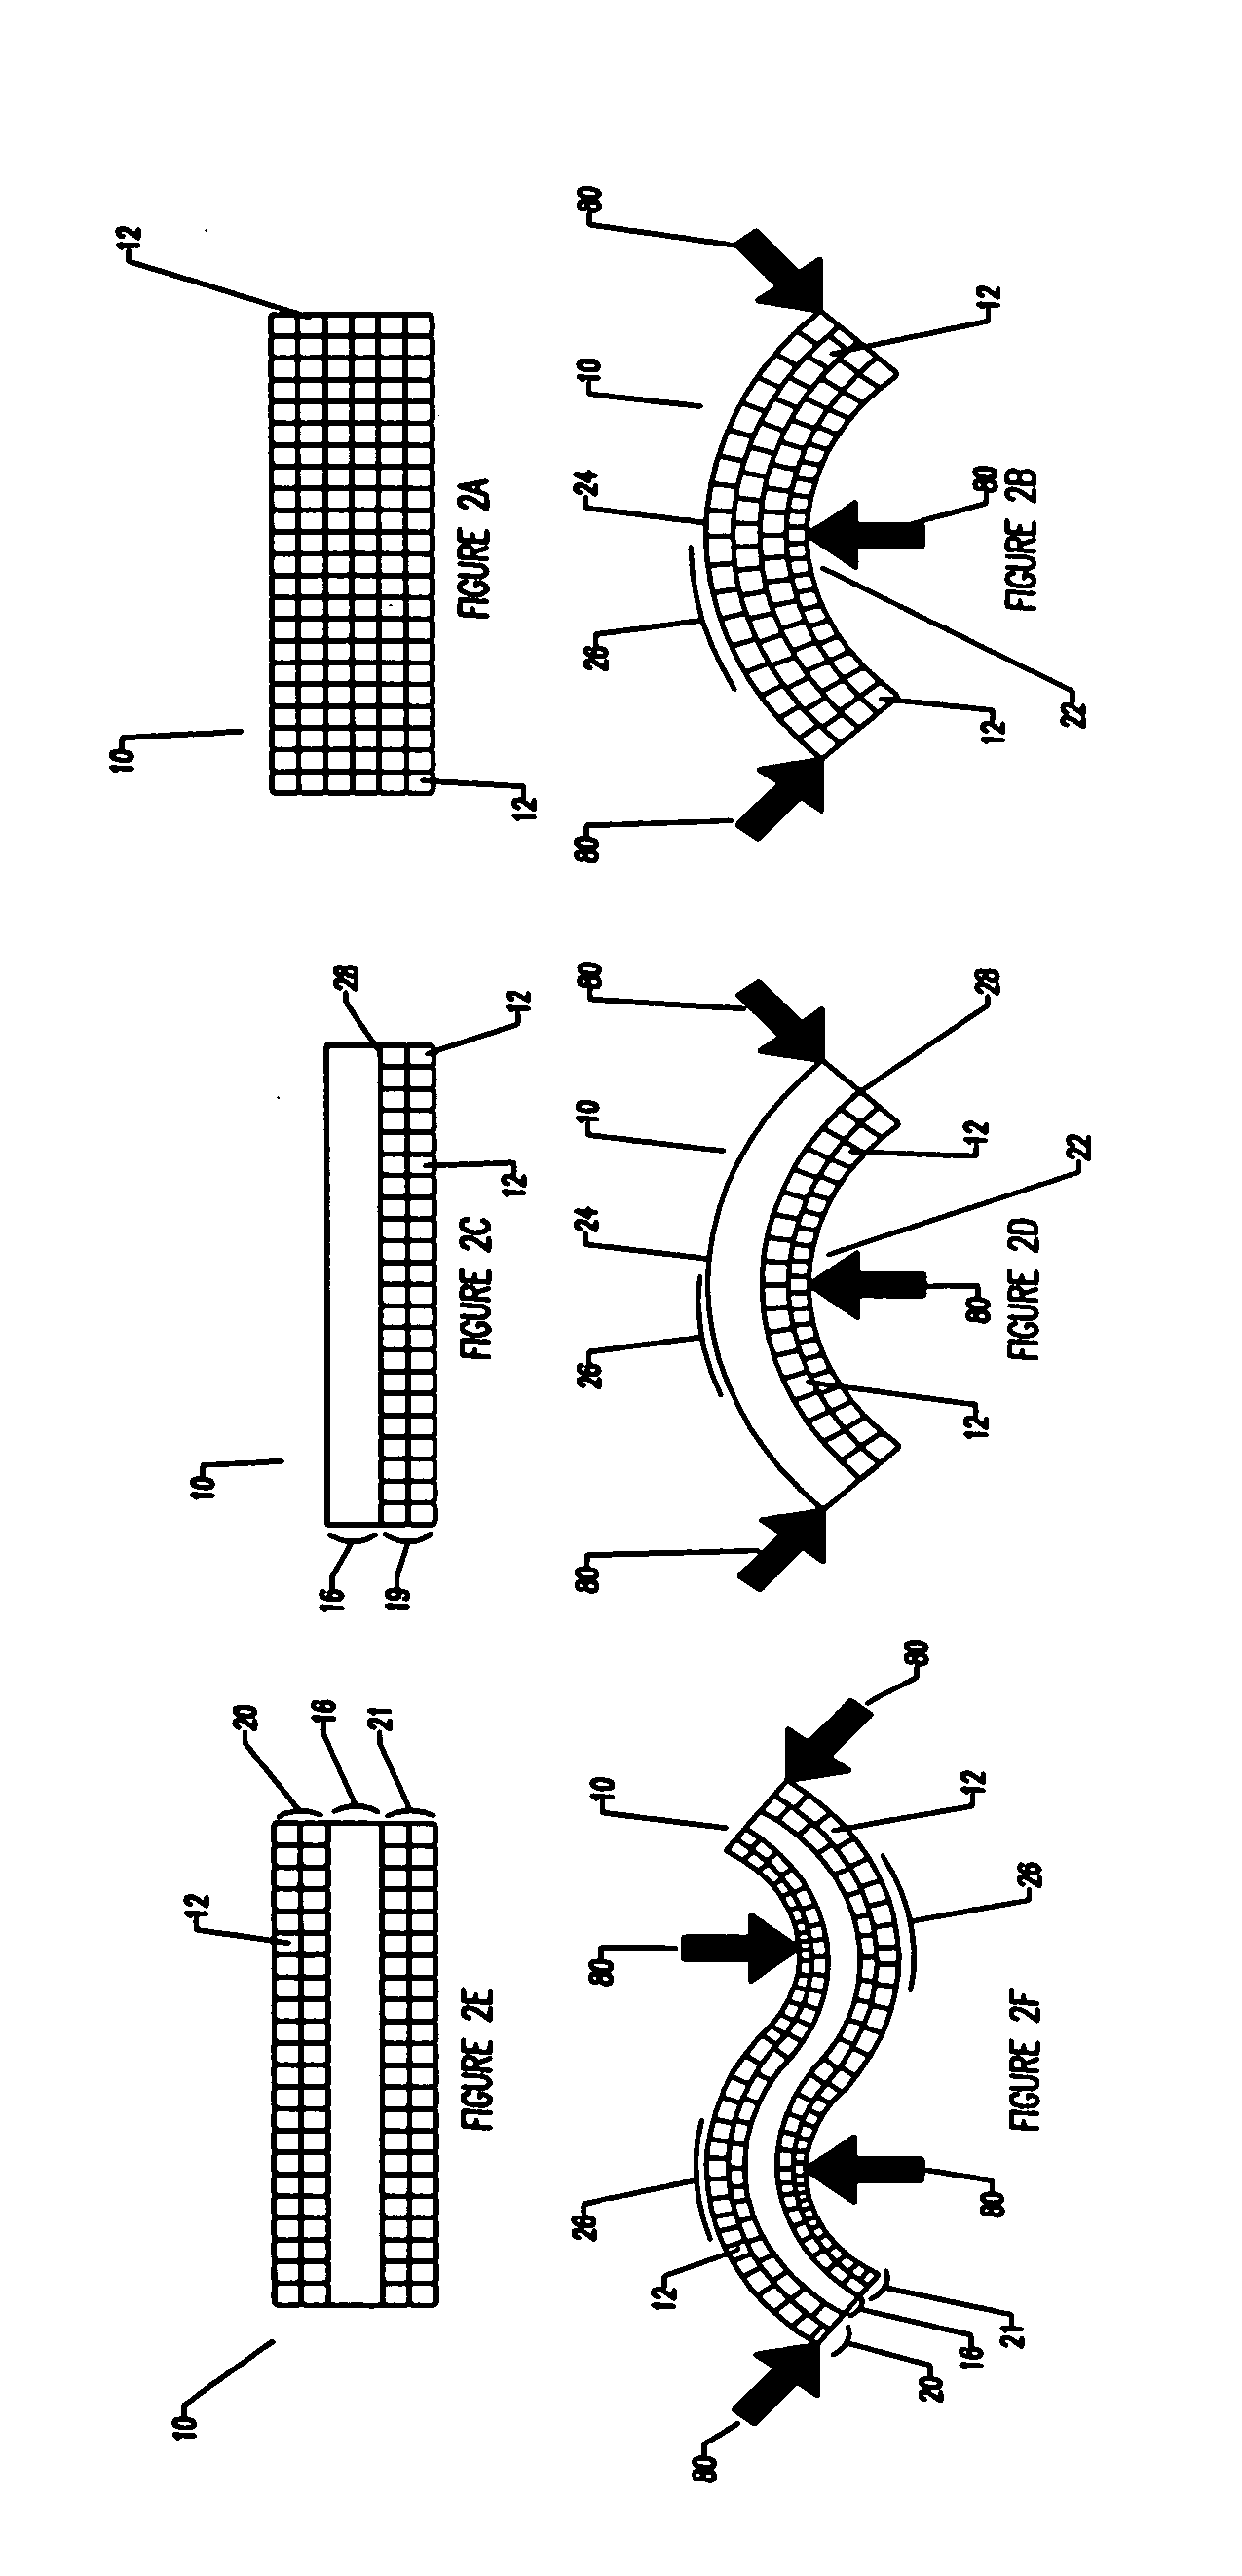 Compliant osteosynthesis fixation plate